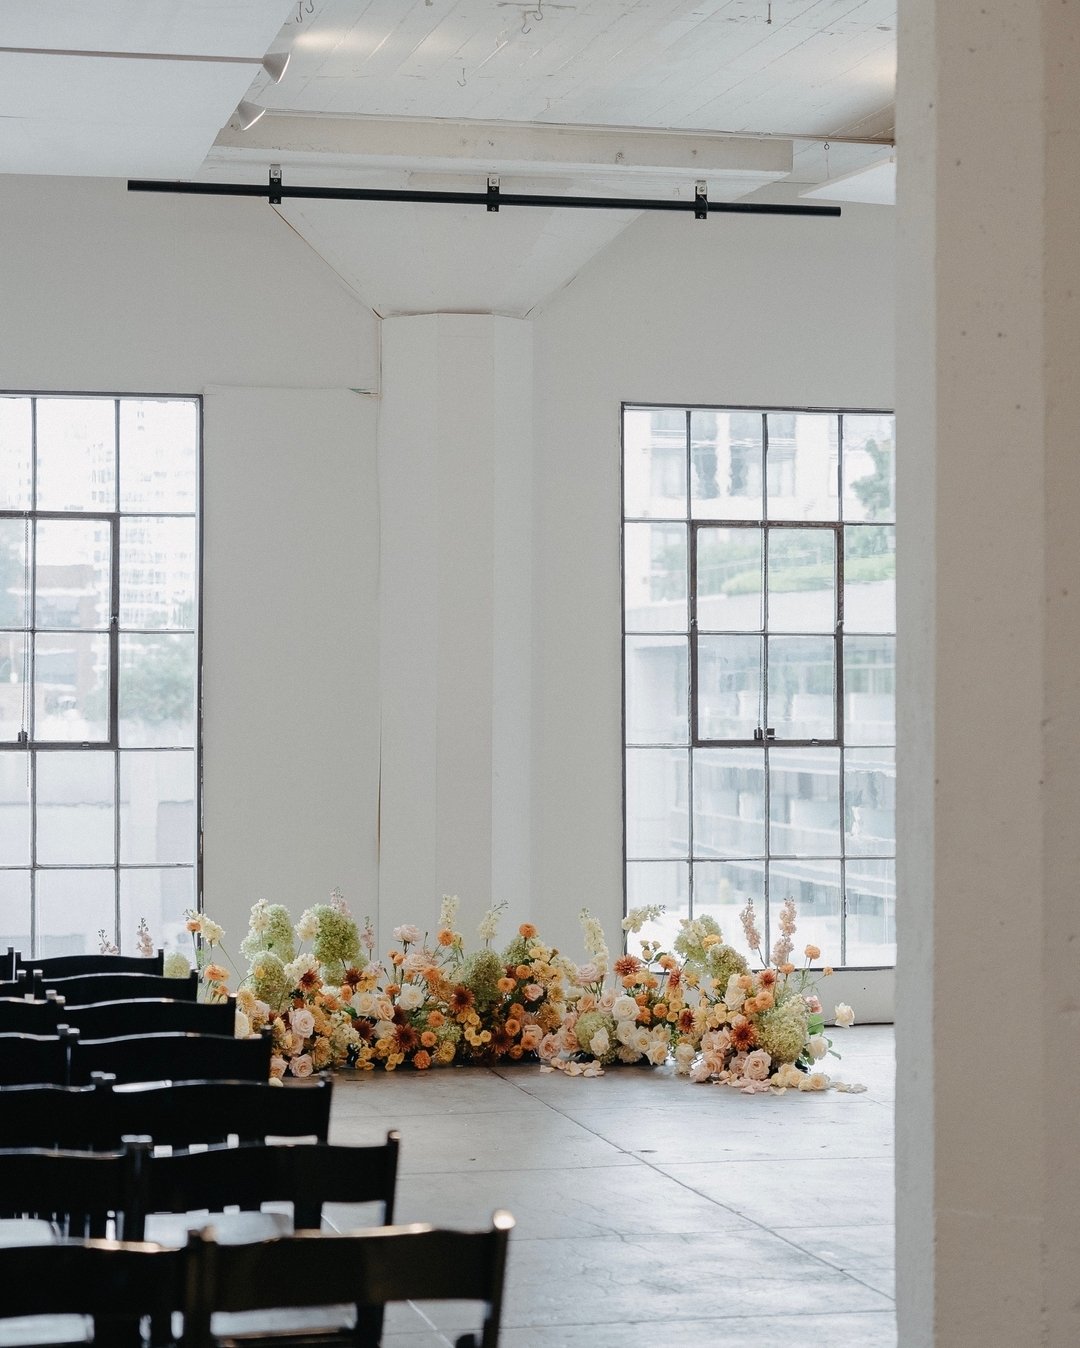 how could we not do a ground installation?? @poppyhill_flowers 

there&rsquo;s just something about the contrast of such a colorful, natural element against the industrial concrete floor of the building that brings me such joy

venue: @hudsonloft
pla